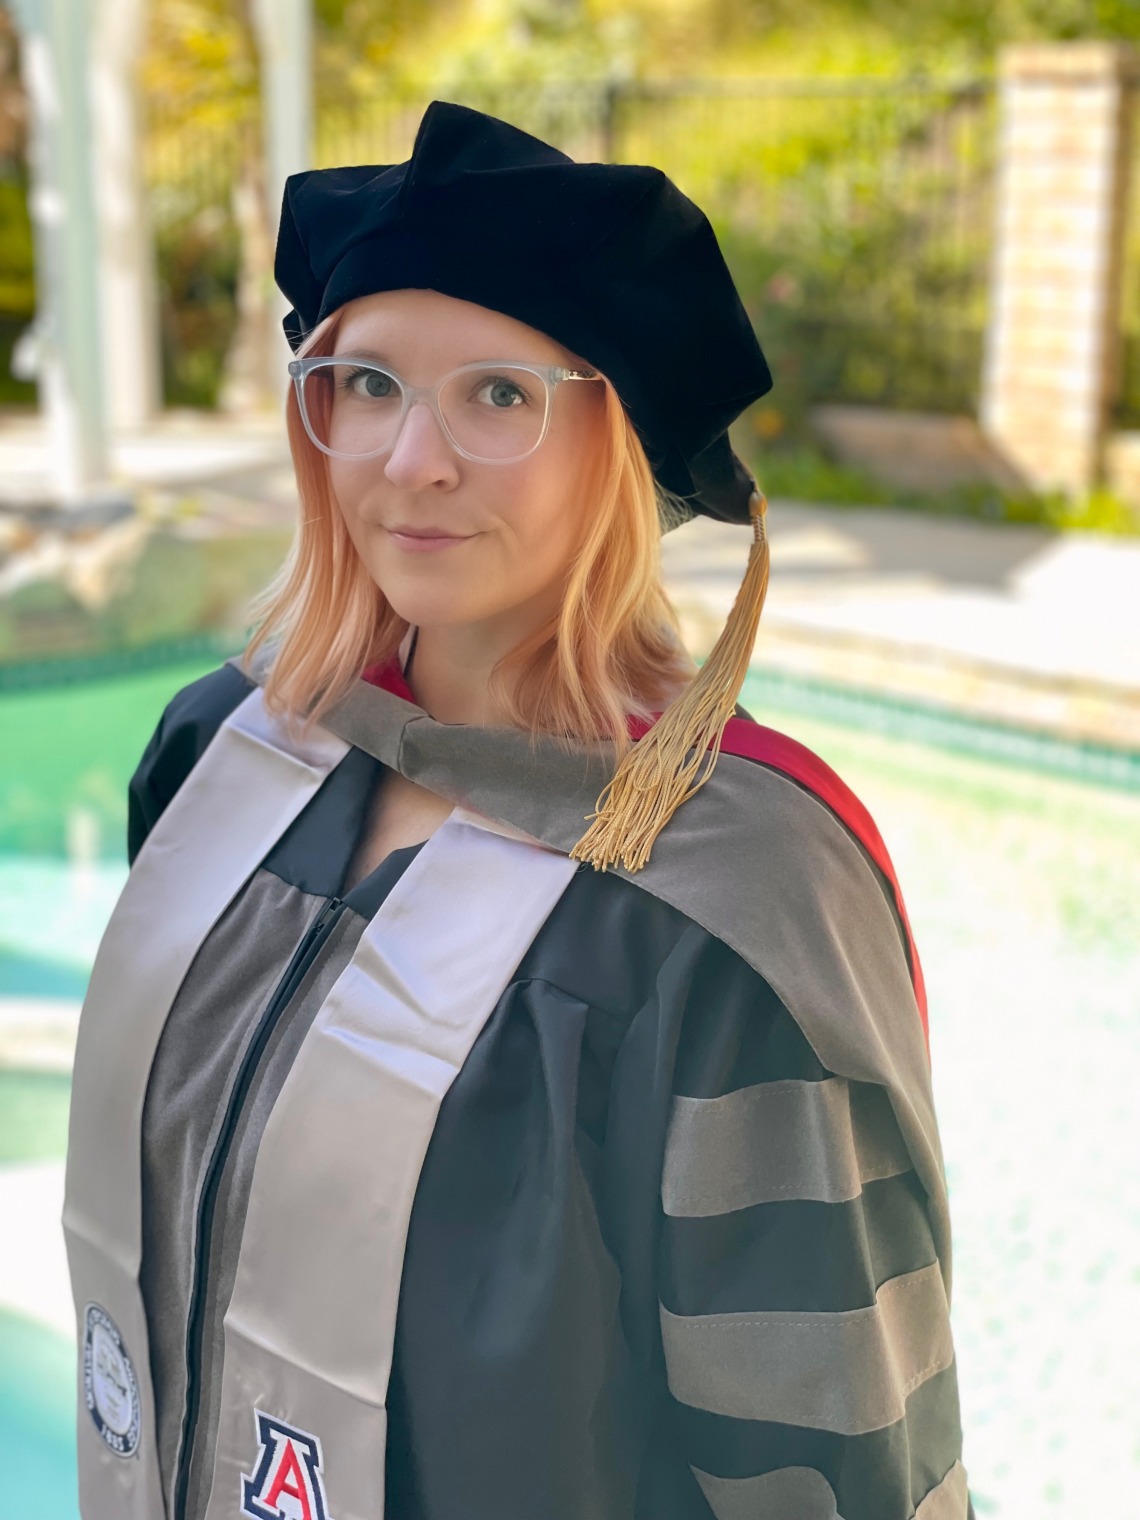 Ashley Sujata stands in front of a water feature and wears veterinary graduation regalia.